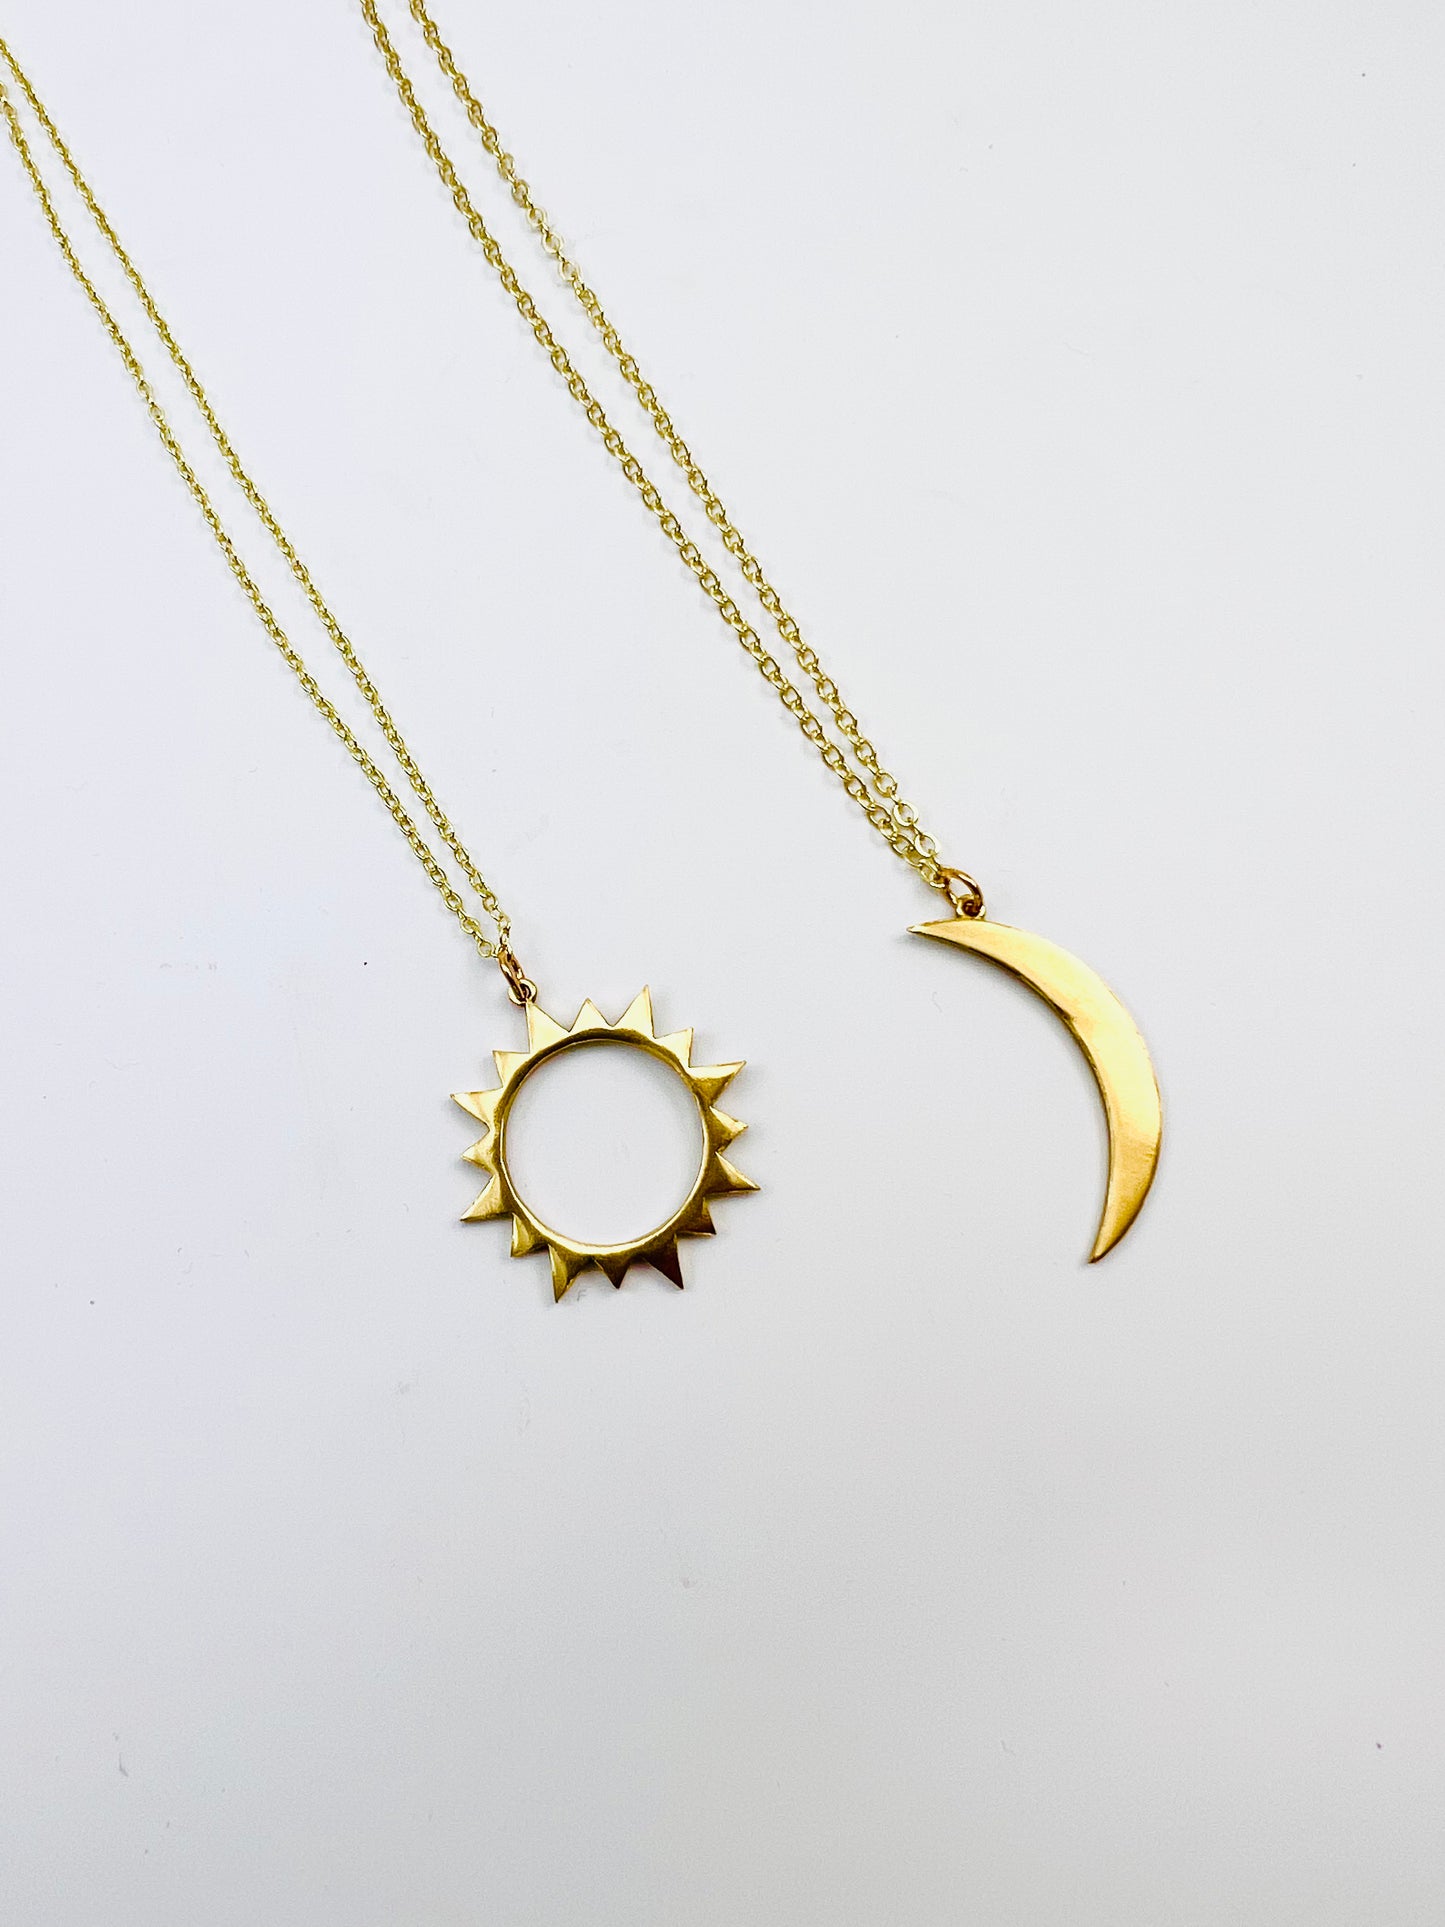 Sun and Moon Necklace Set